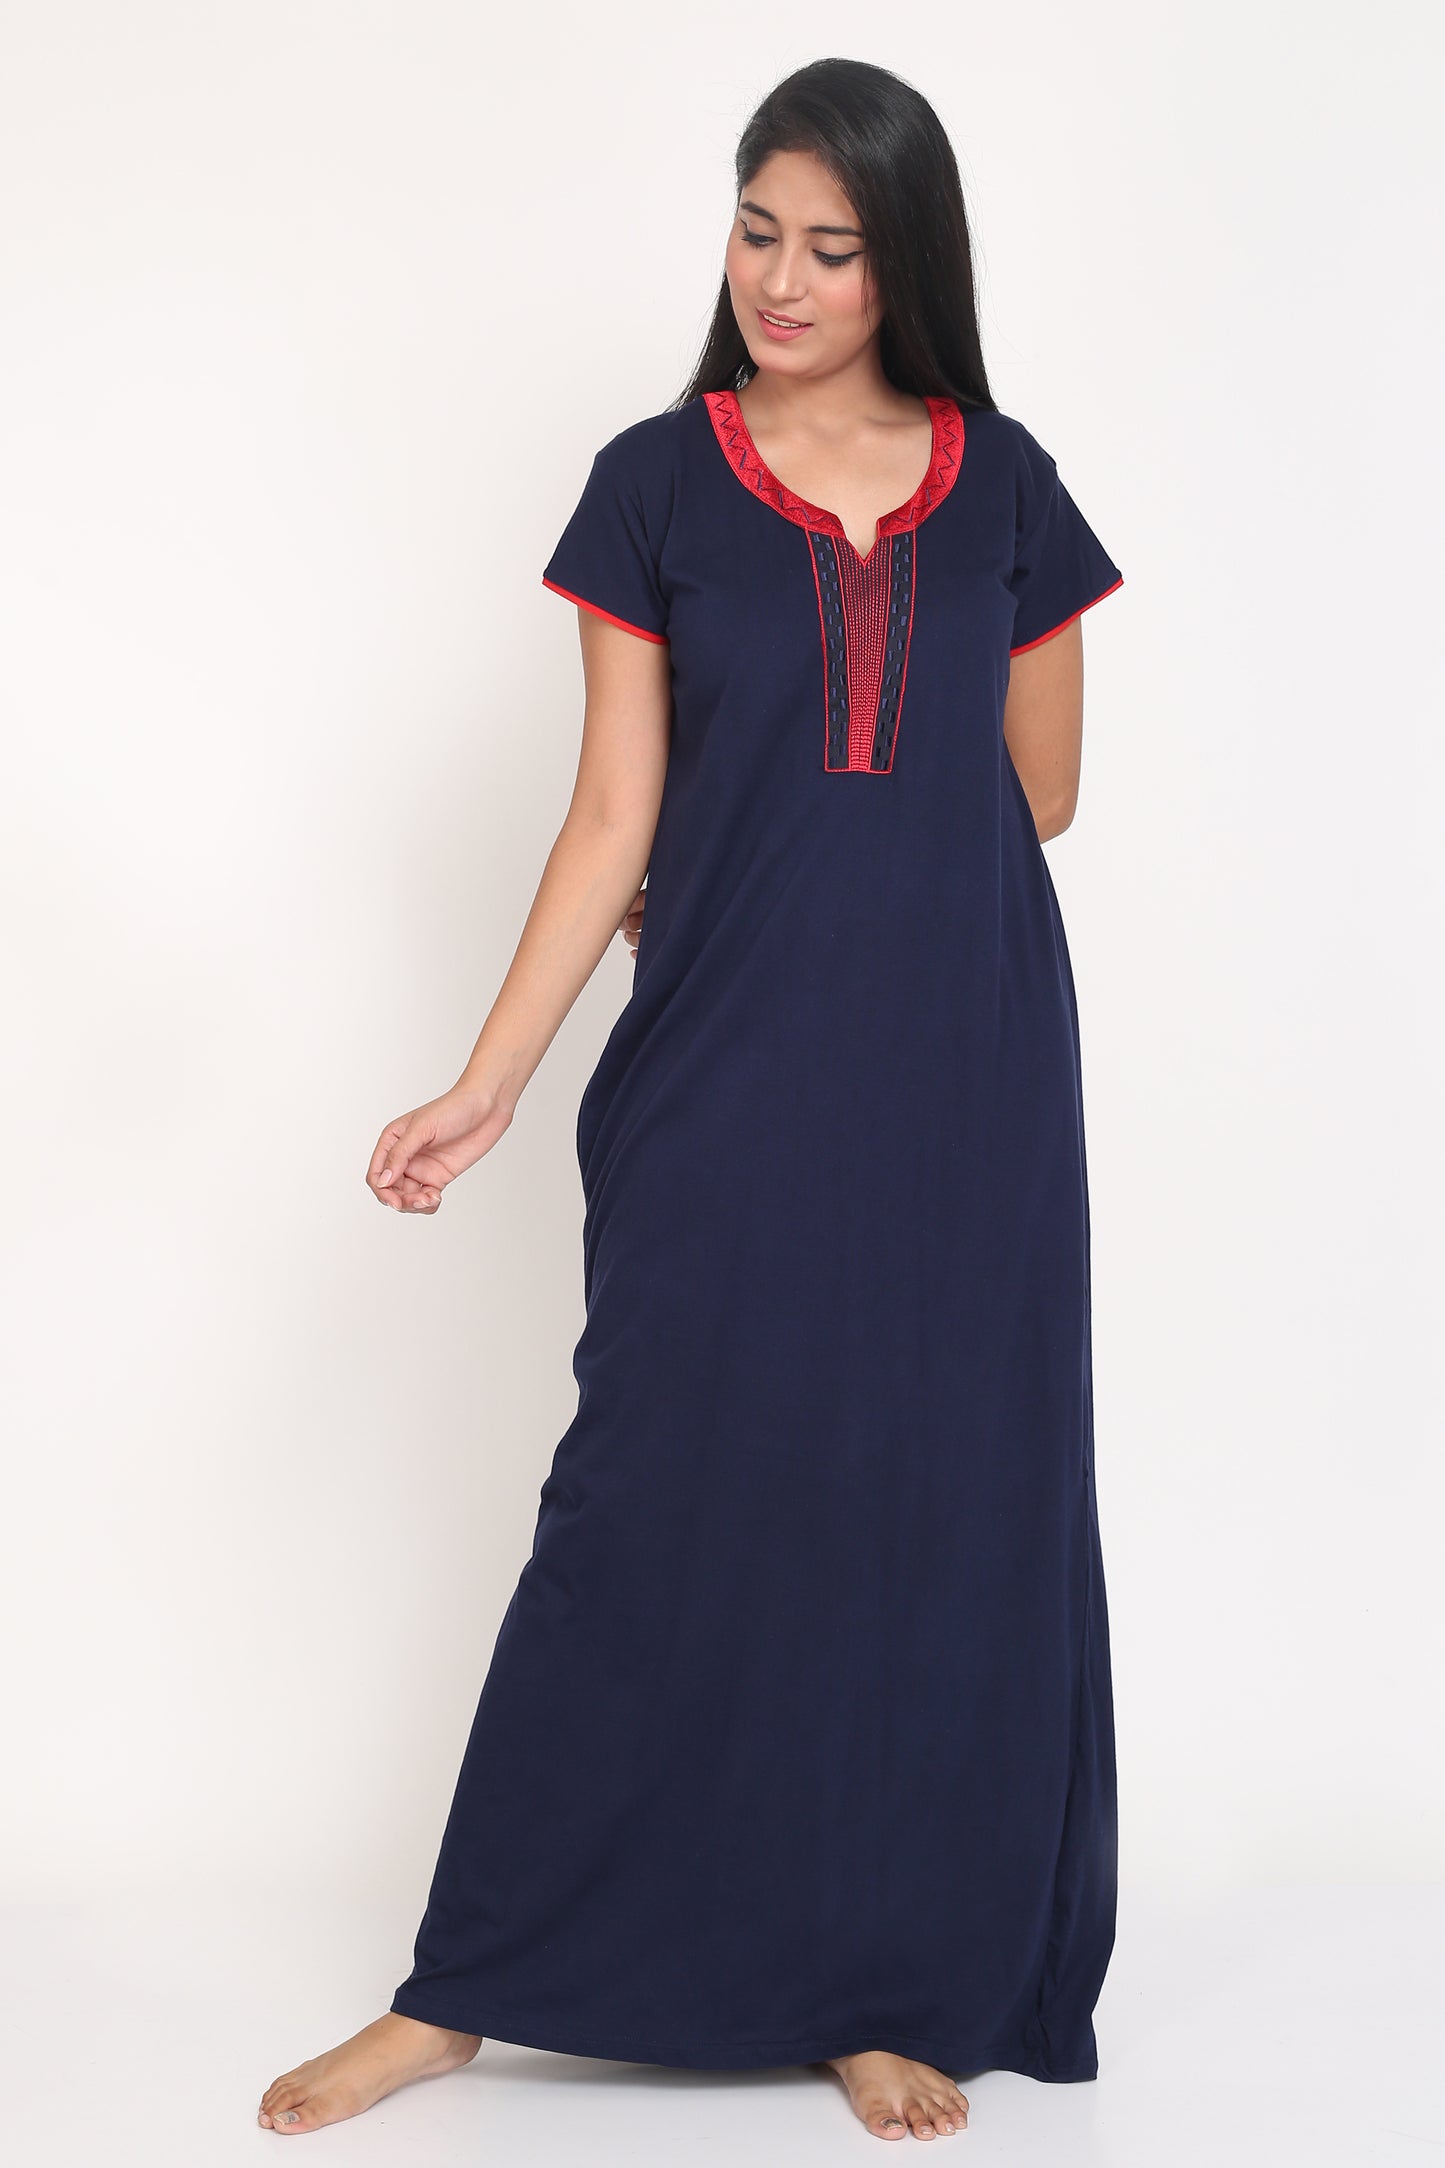 Women's Hosiery Navy Blue Plain Maxi Nightgown with Embroidery Neck